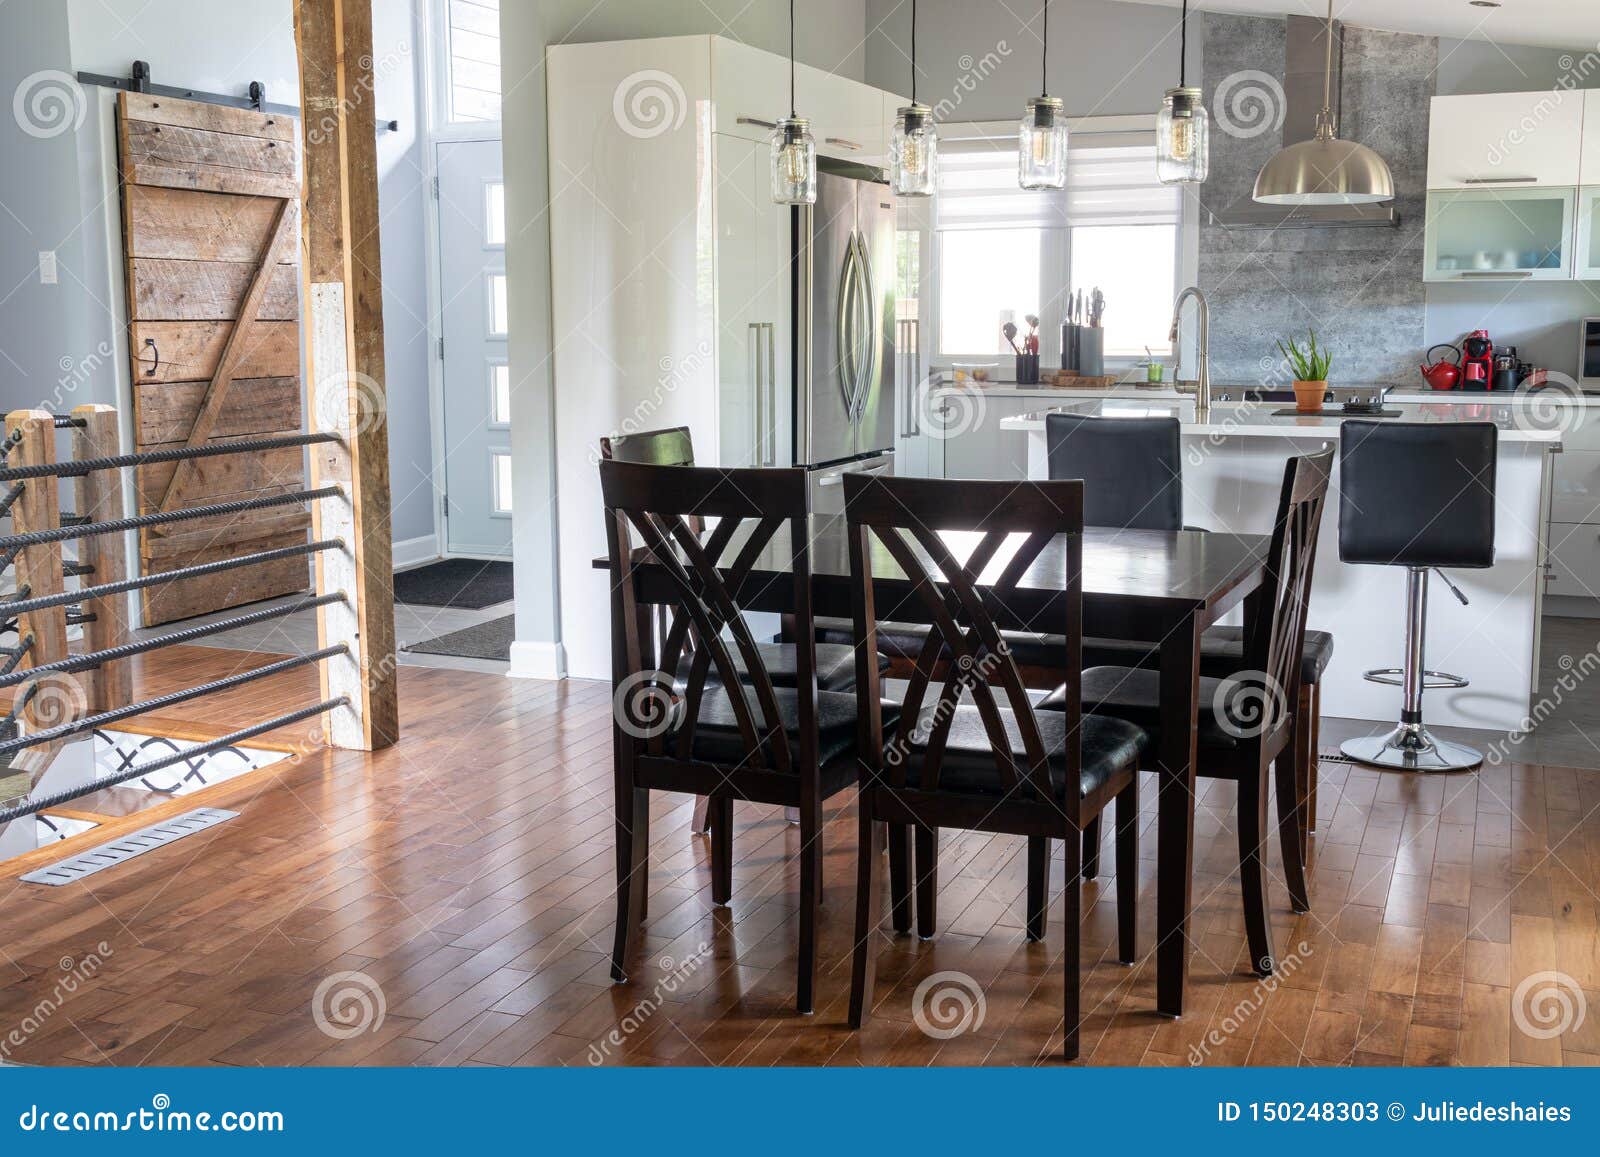 Modern Dining Room Inside Home Stock Image Image Of Chair